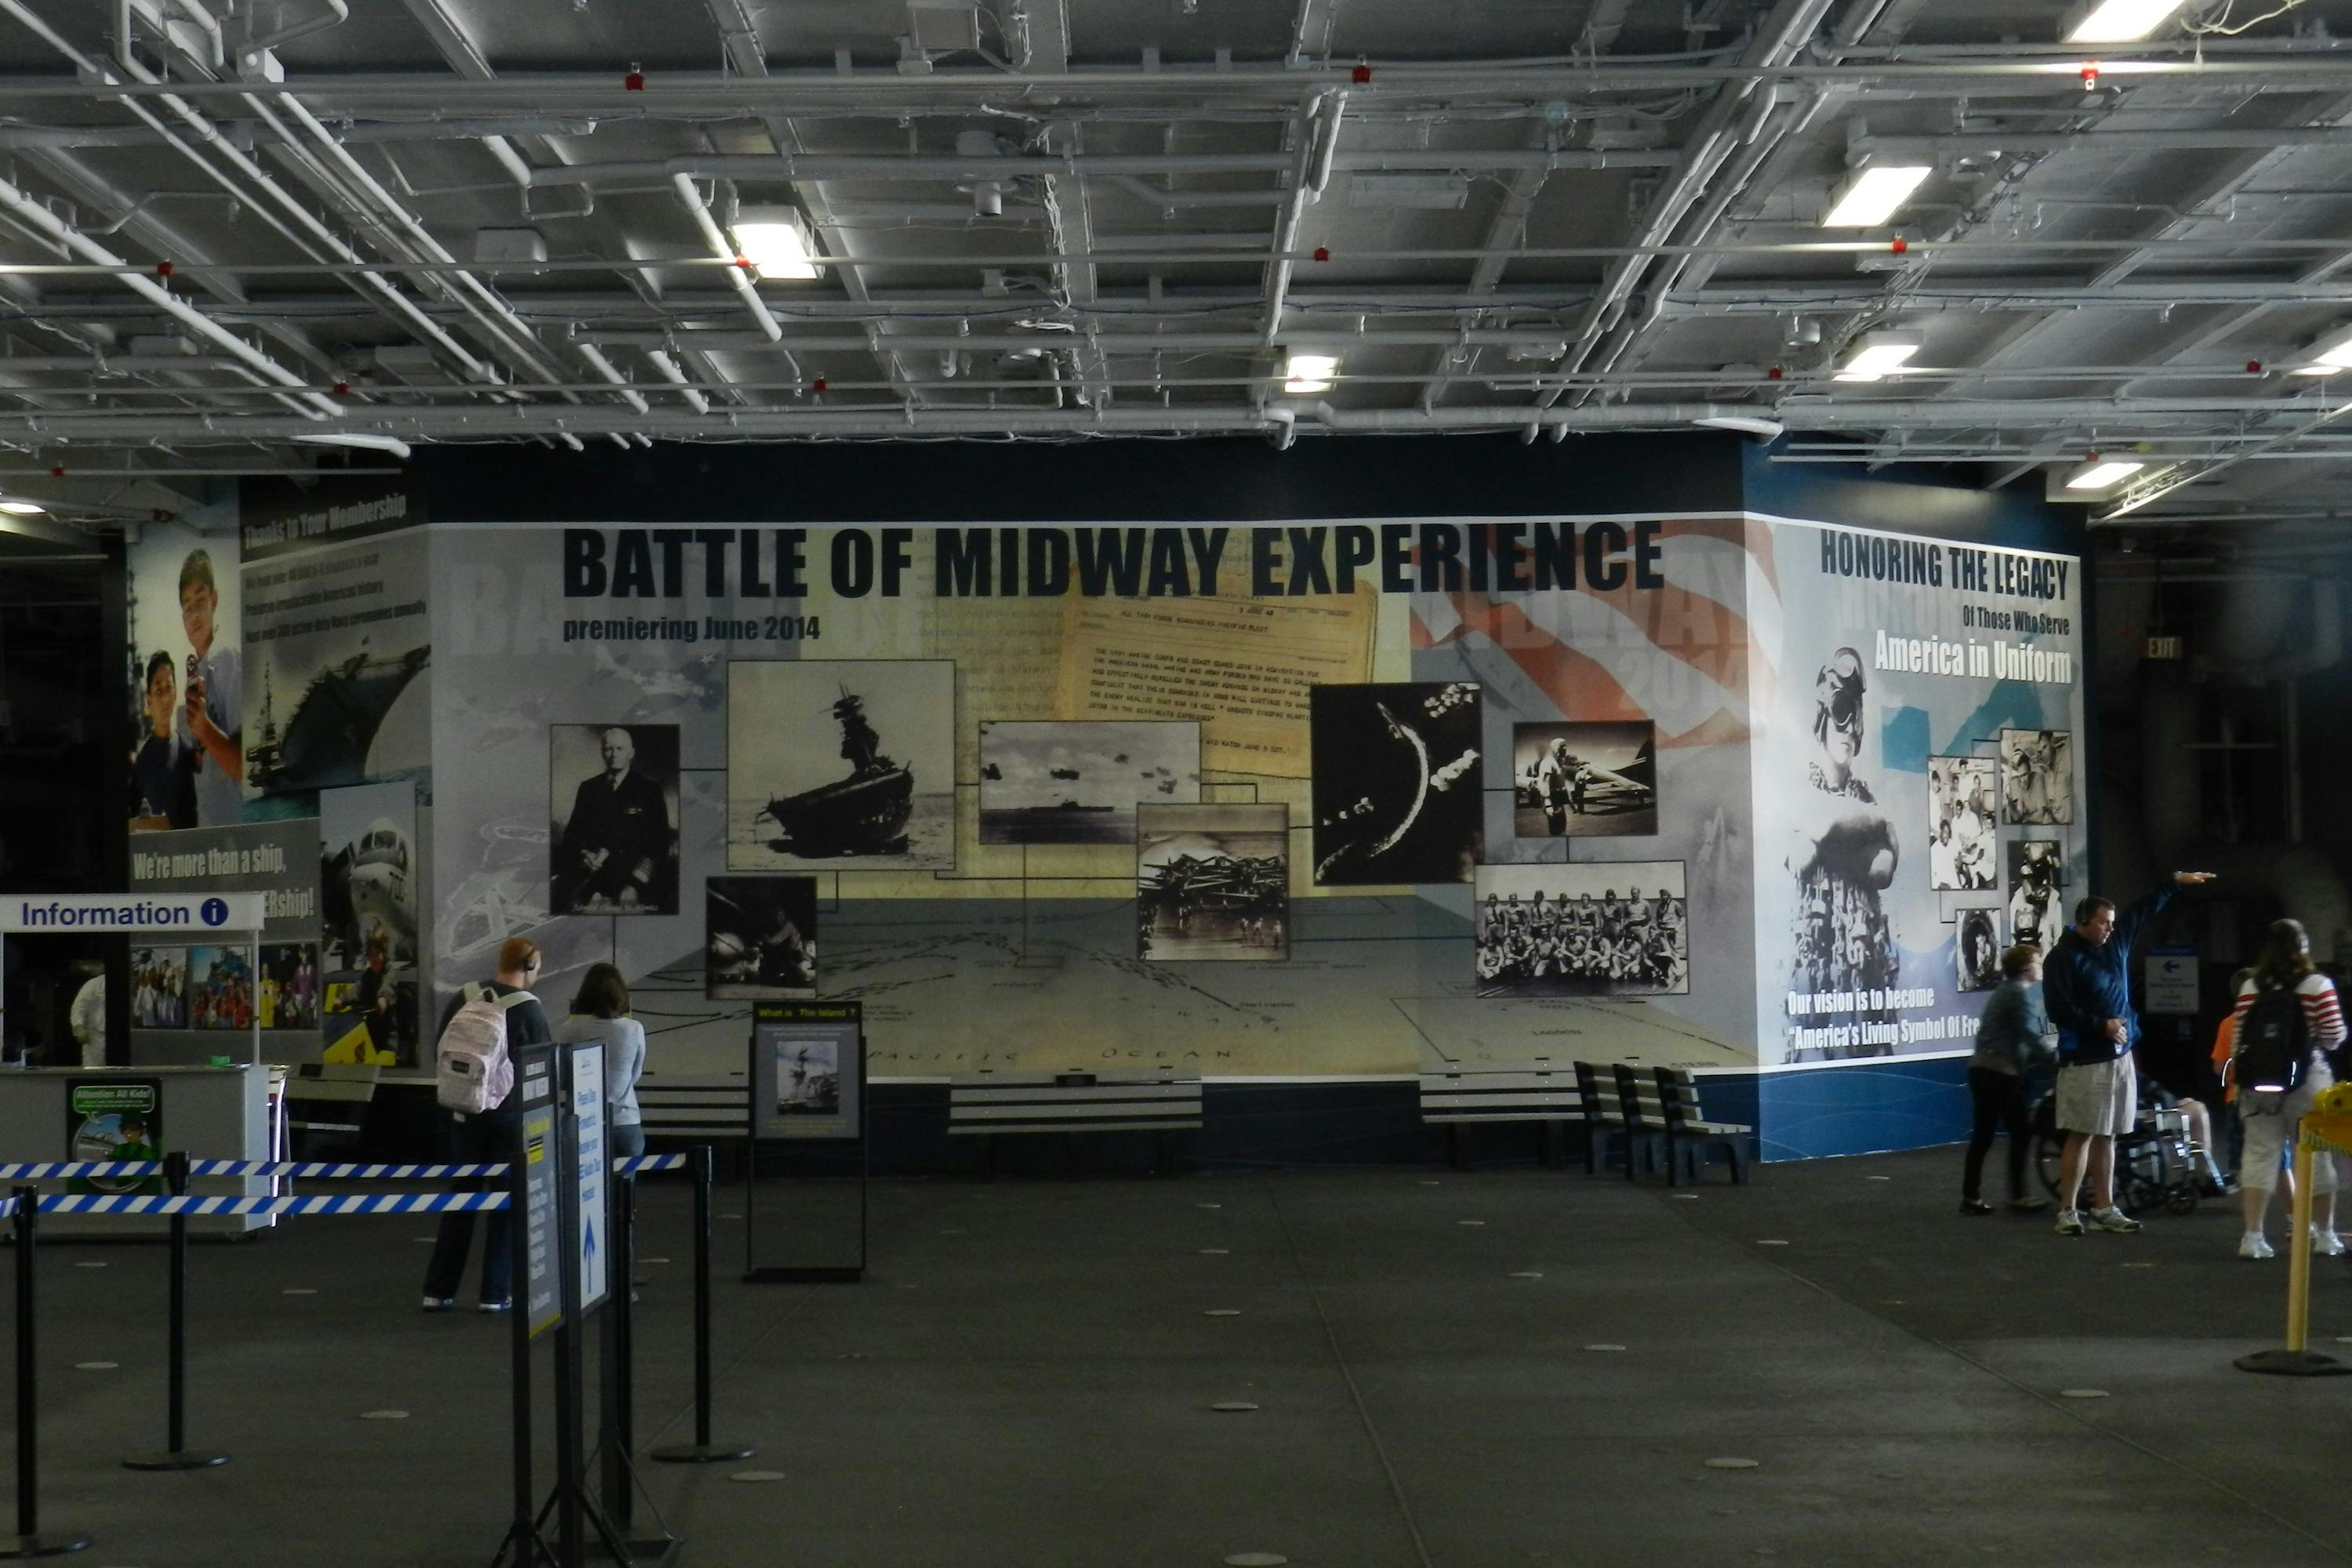 The original Battle of Midway Theater